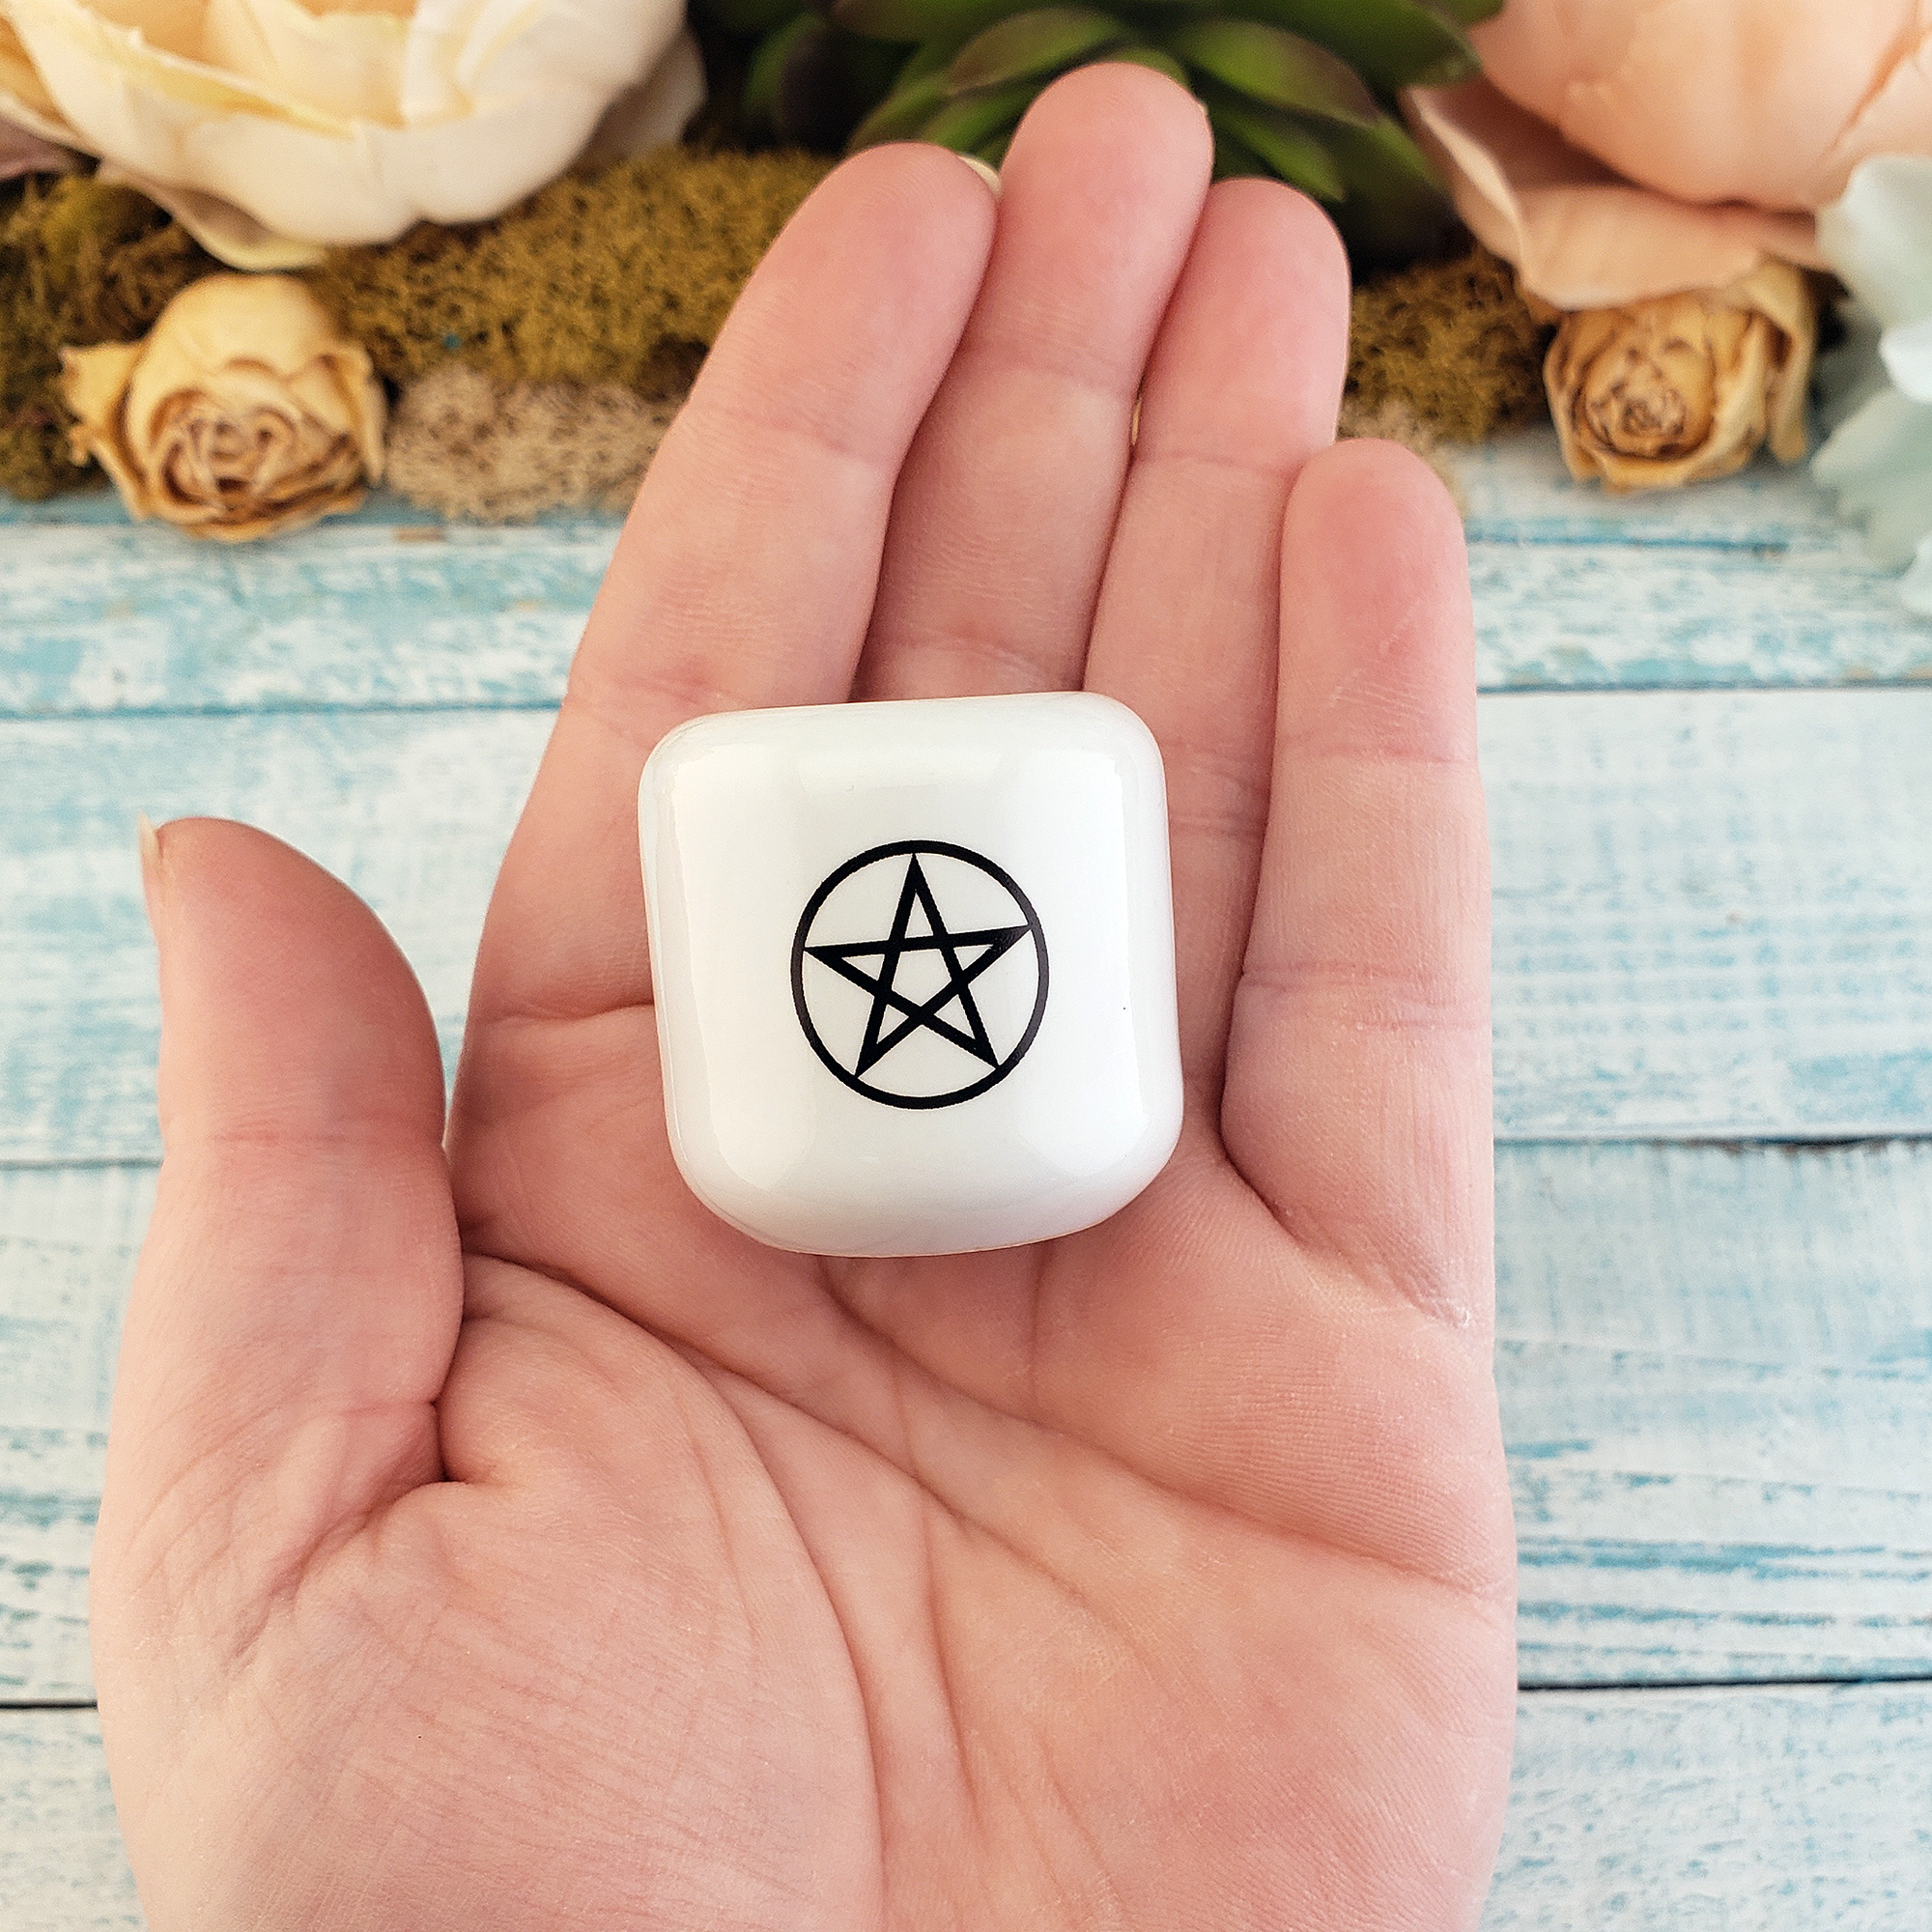 White Pentacle Ceramic Sphere Stand - Chime Candle Holder - Incense Holder - In Hand